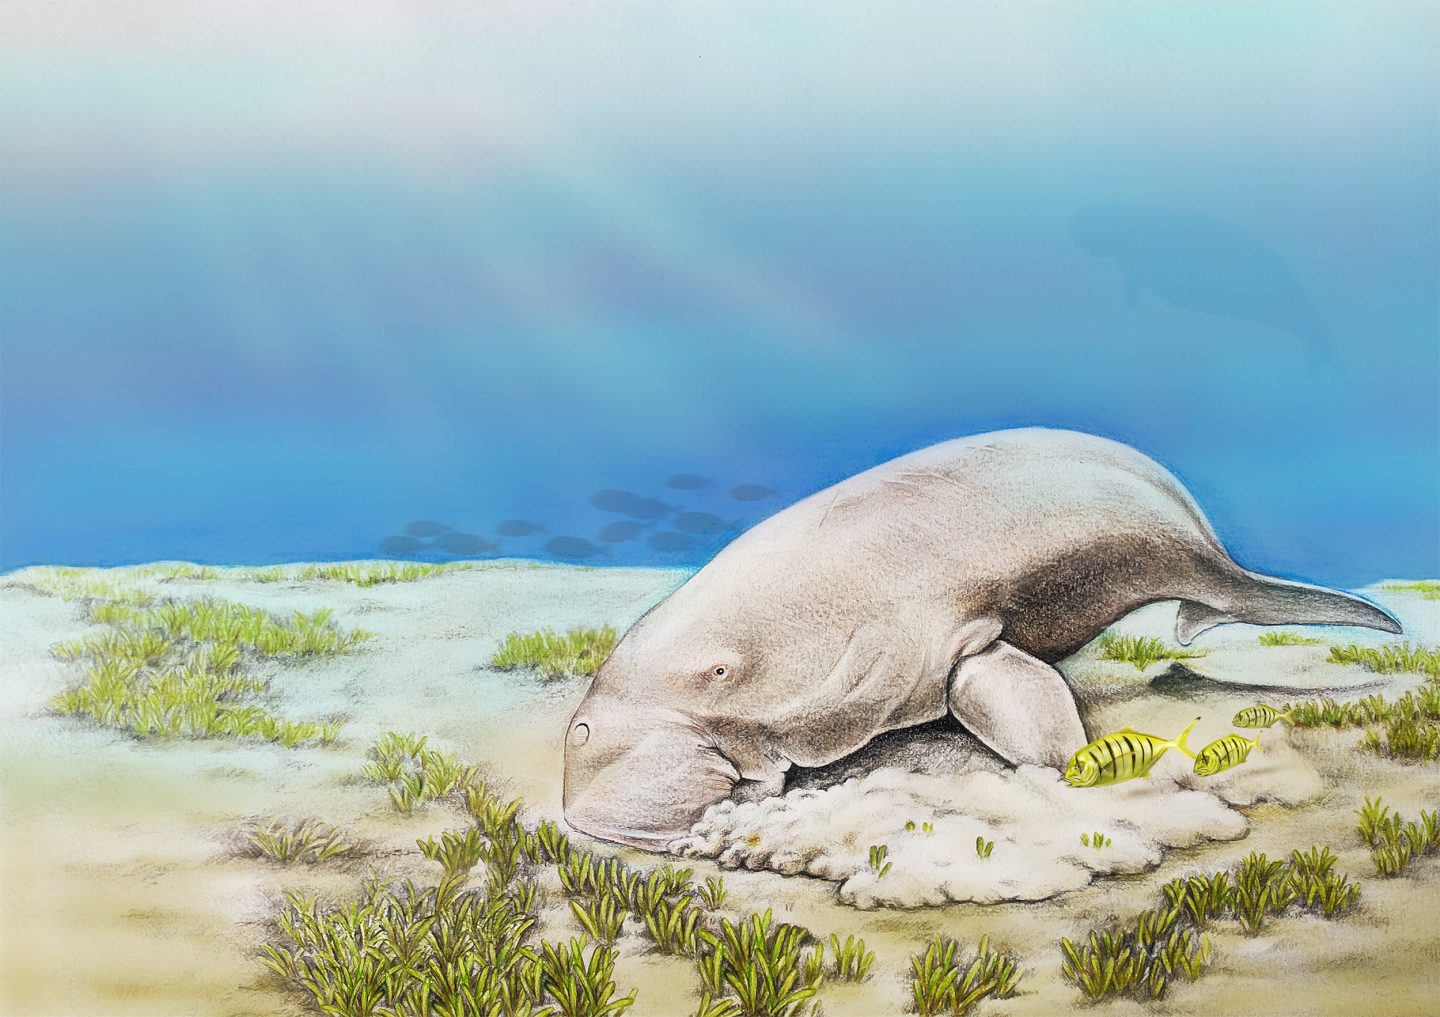 Dugongs rely on seagrasses as their main source of food